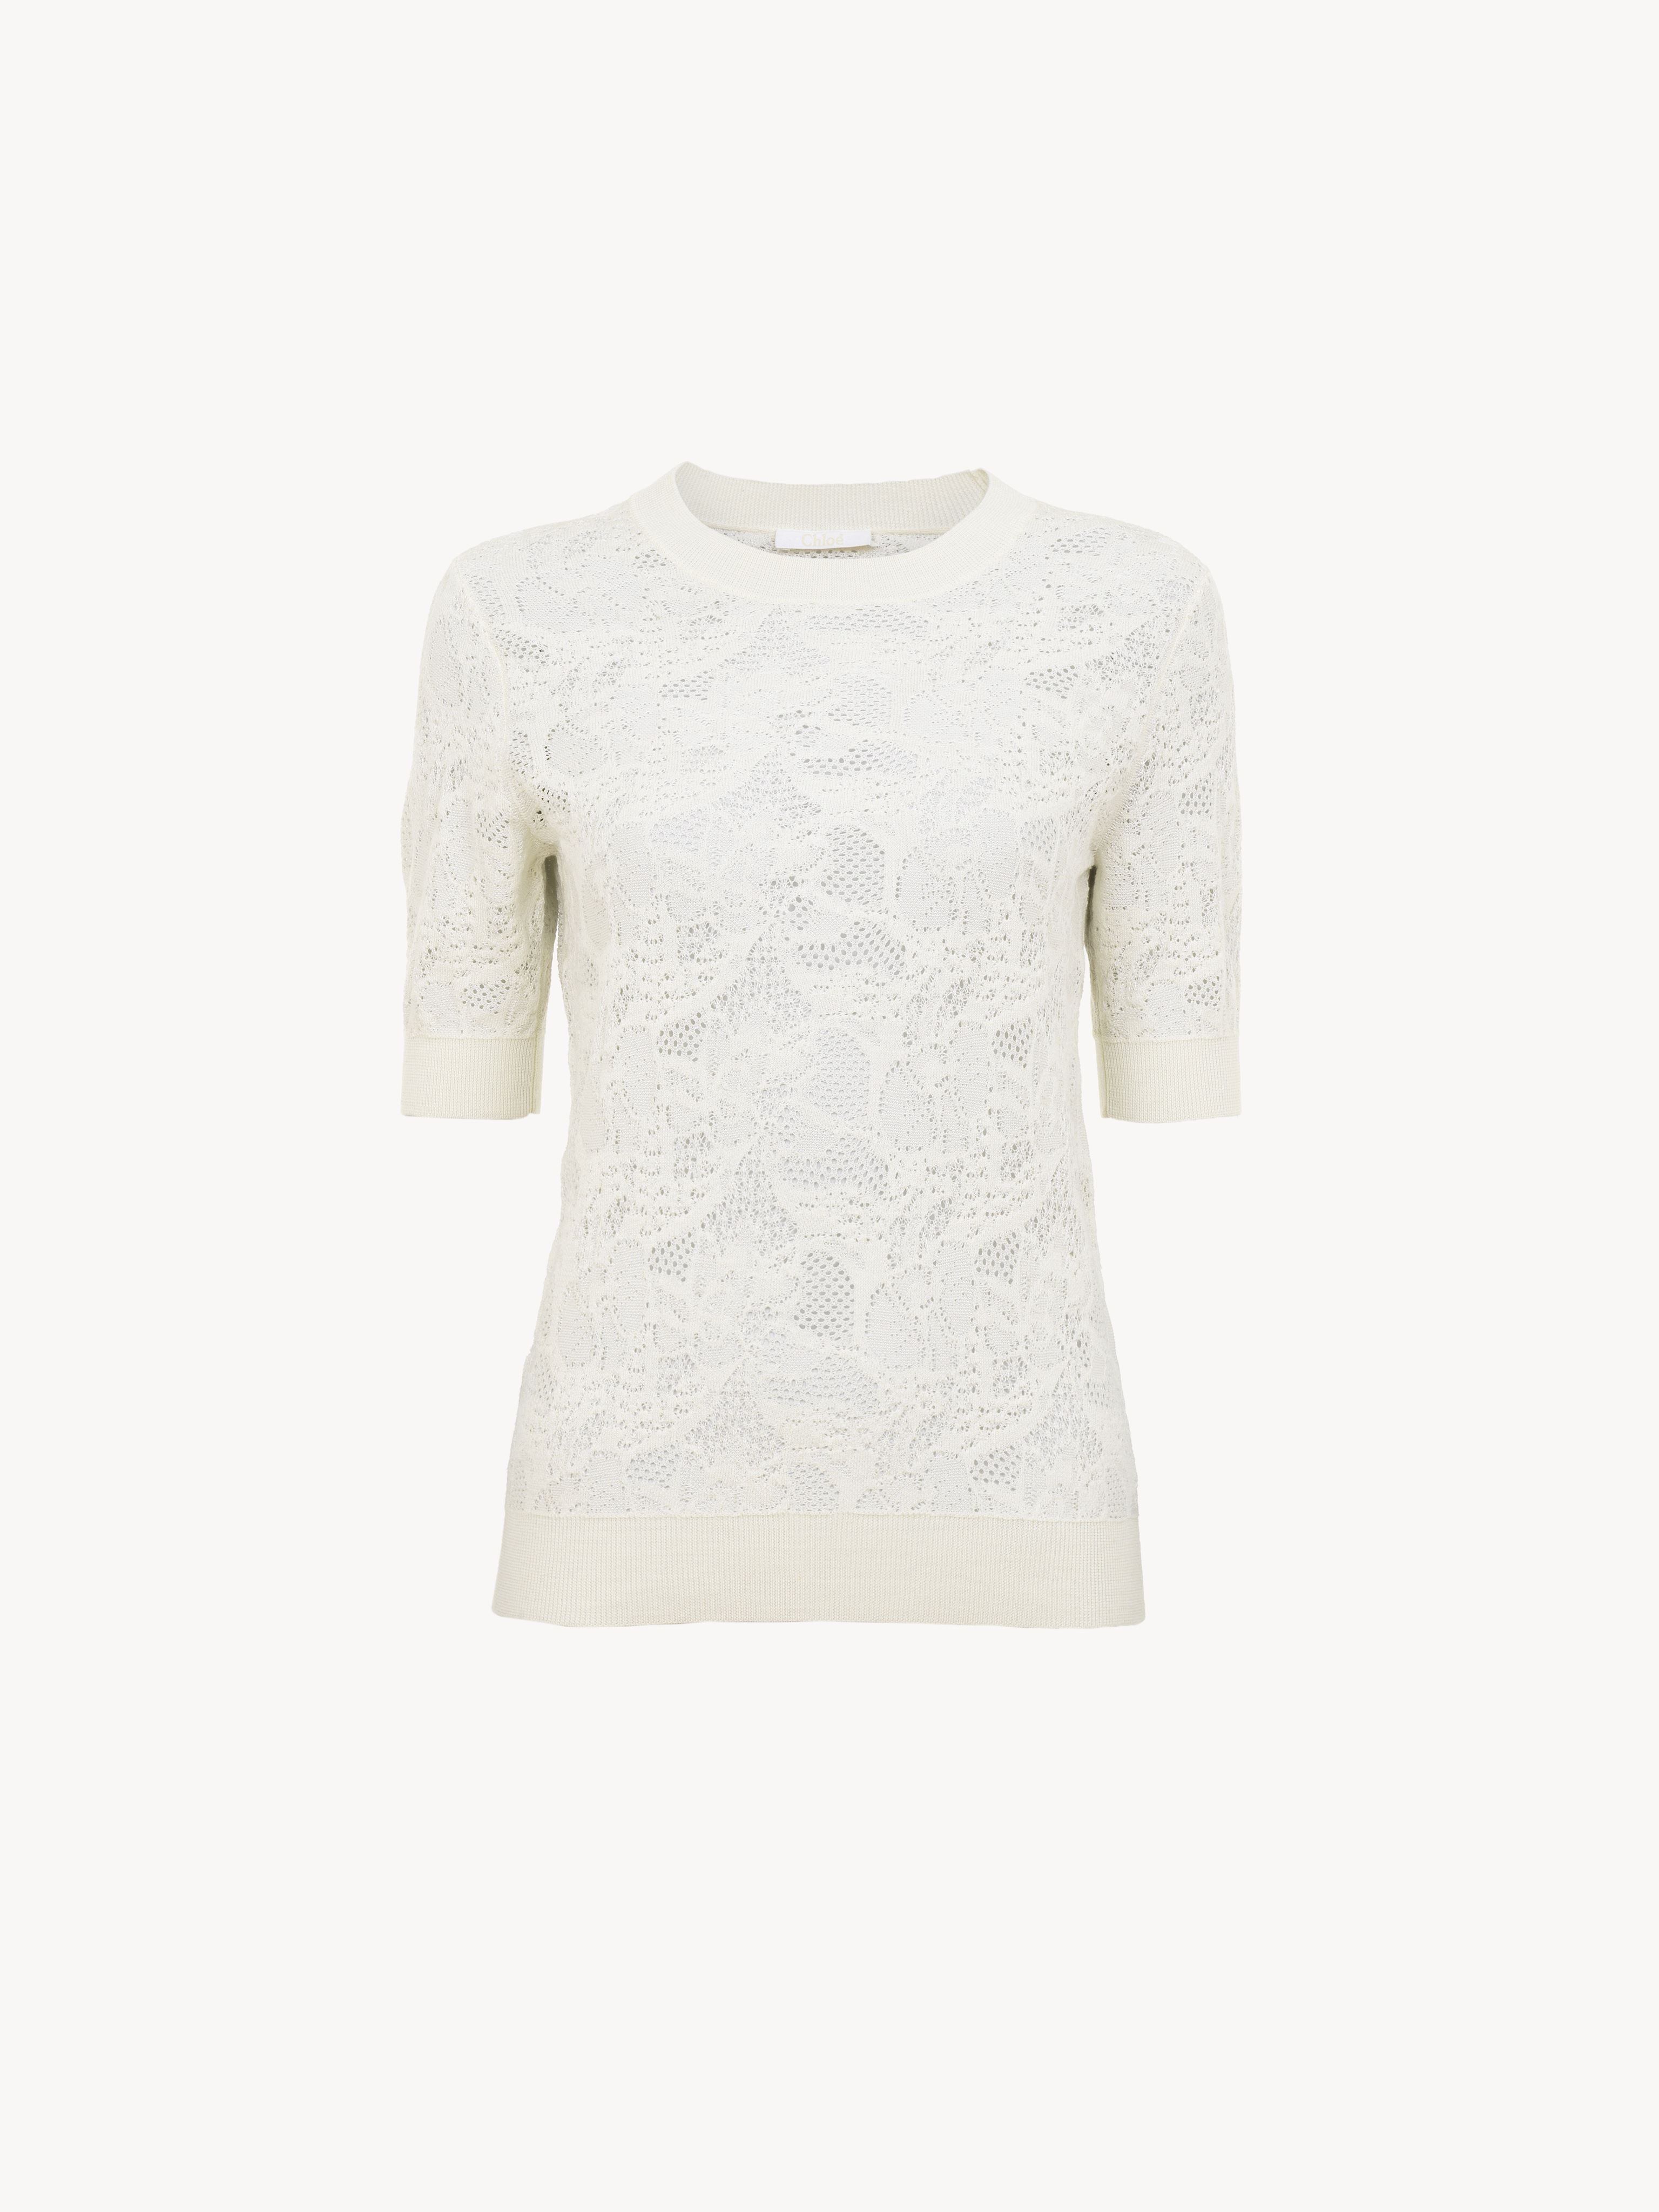 Chloé Pull Manches Courtes Col Rond Femme Blanc Taille S 100% Laine